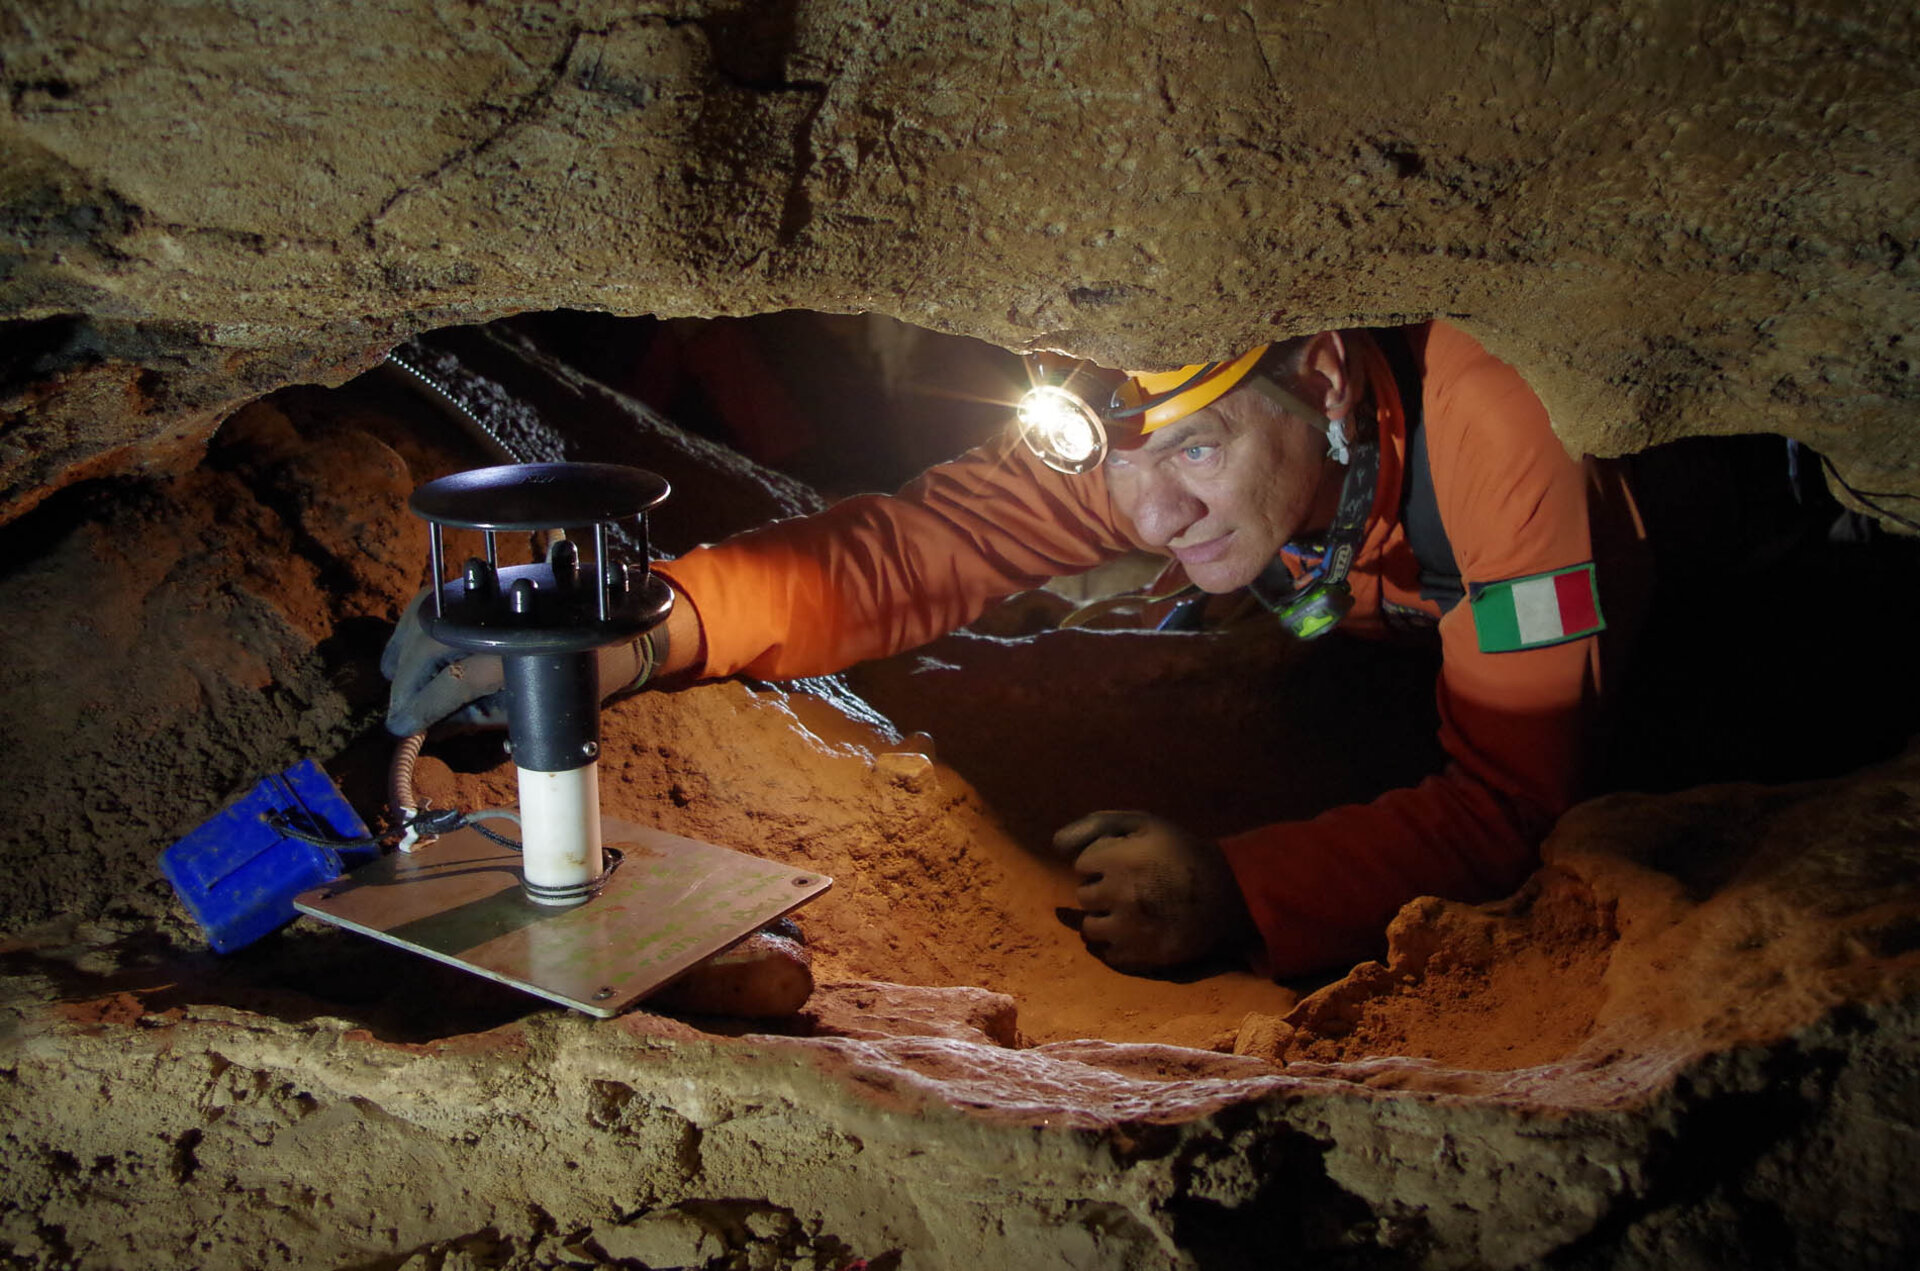 ESA astronaut Paolo Nespoli during the CAVES 2013 campaign